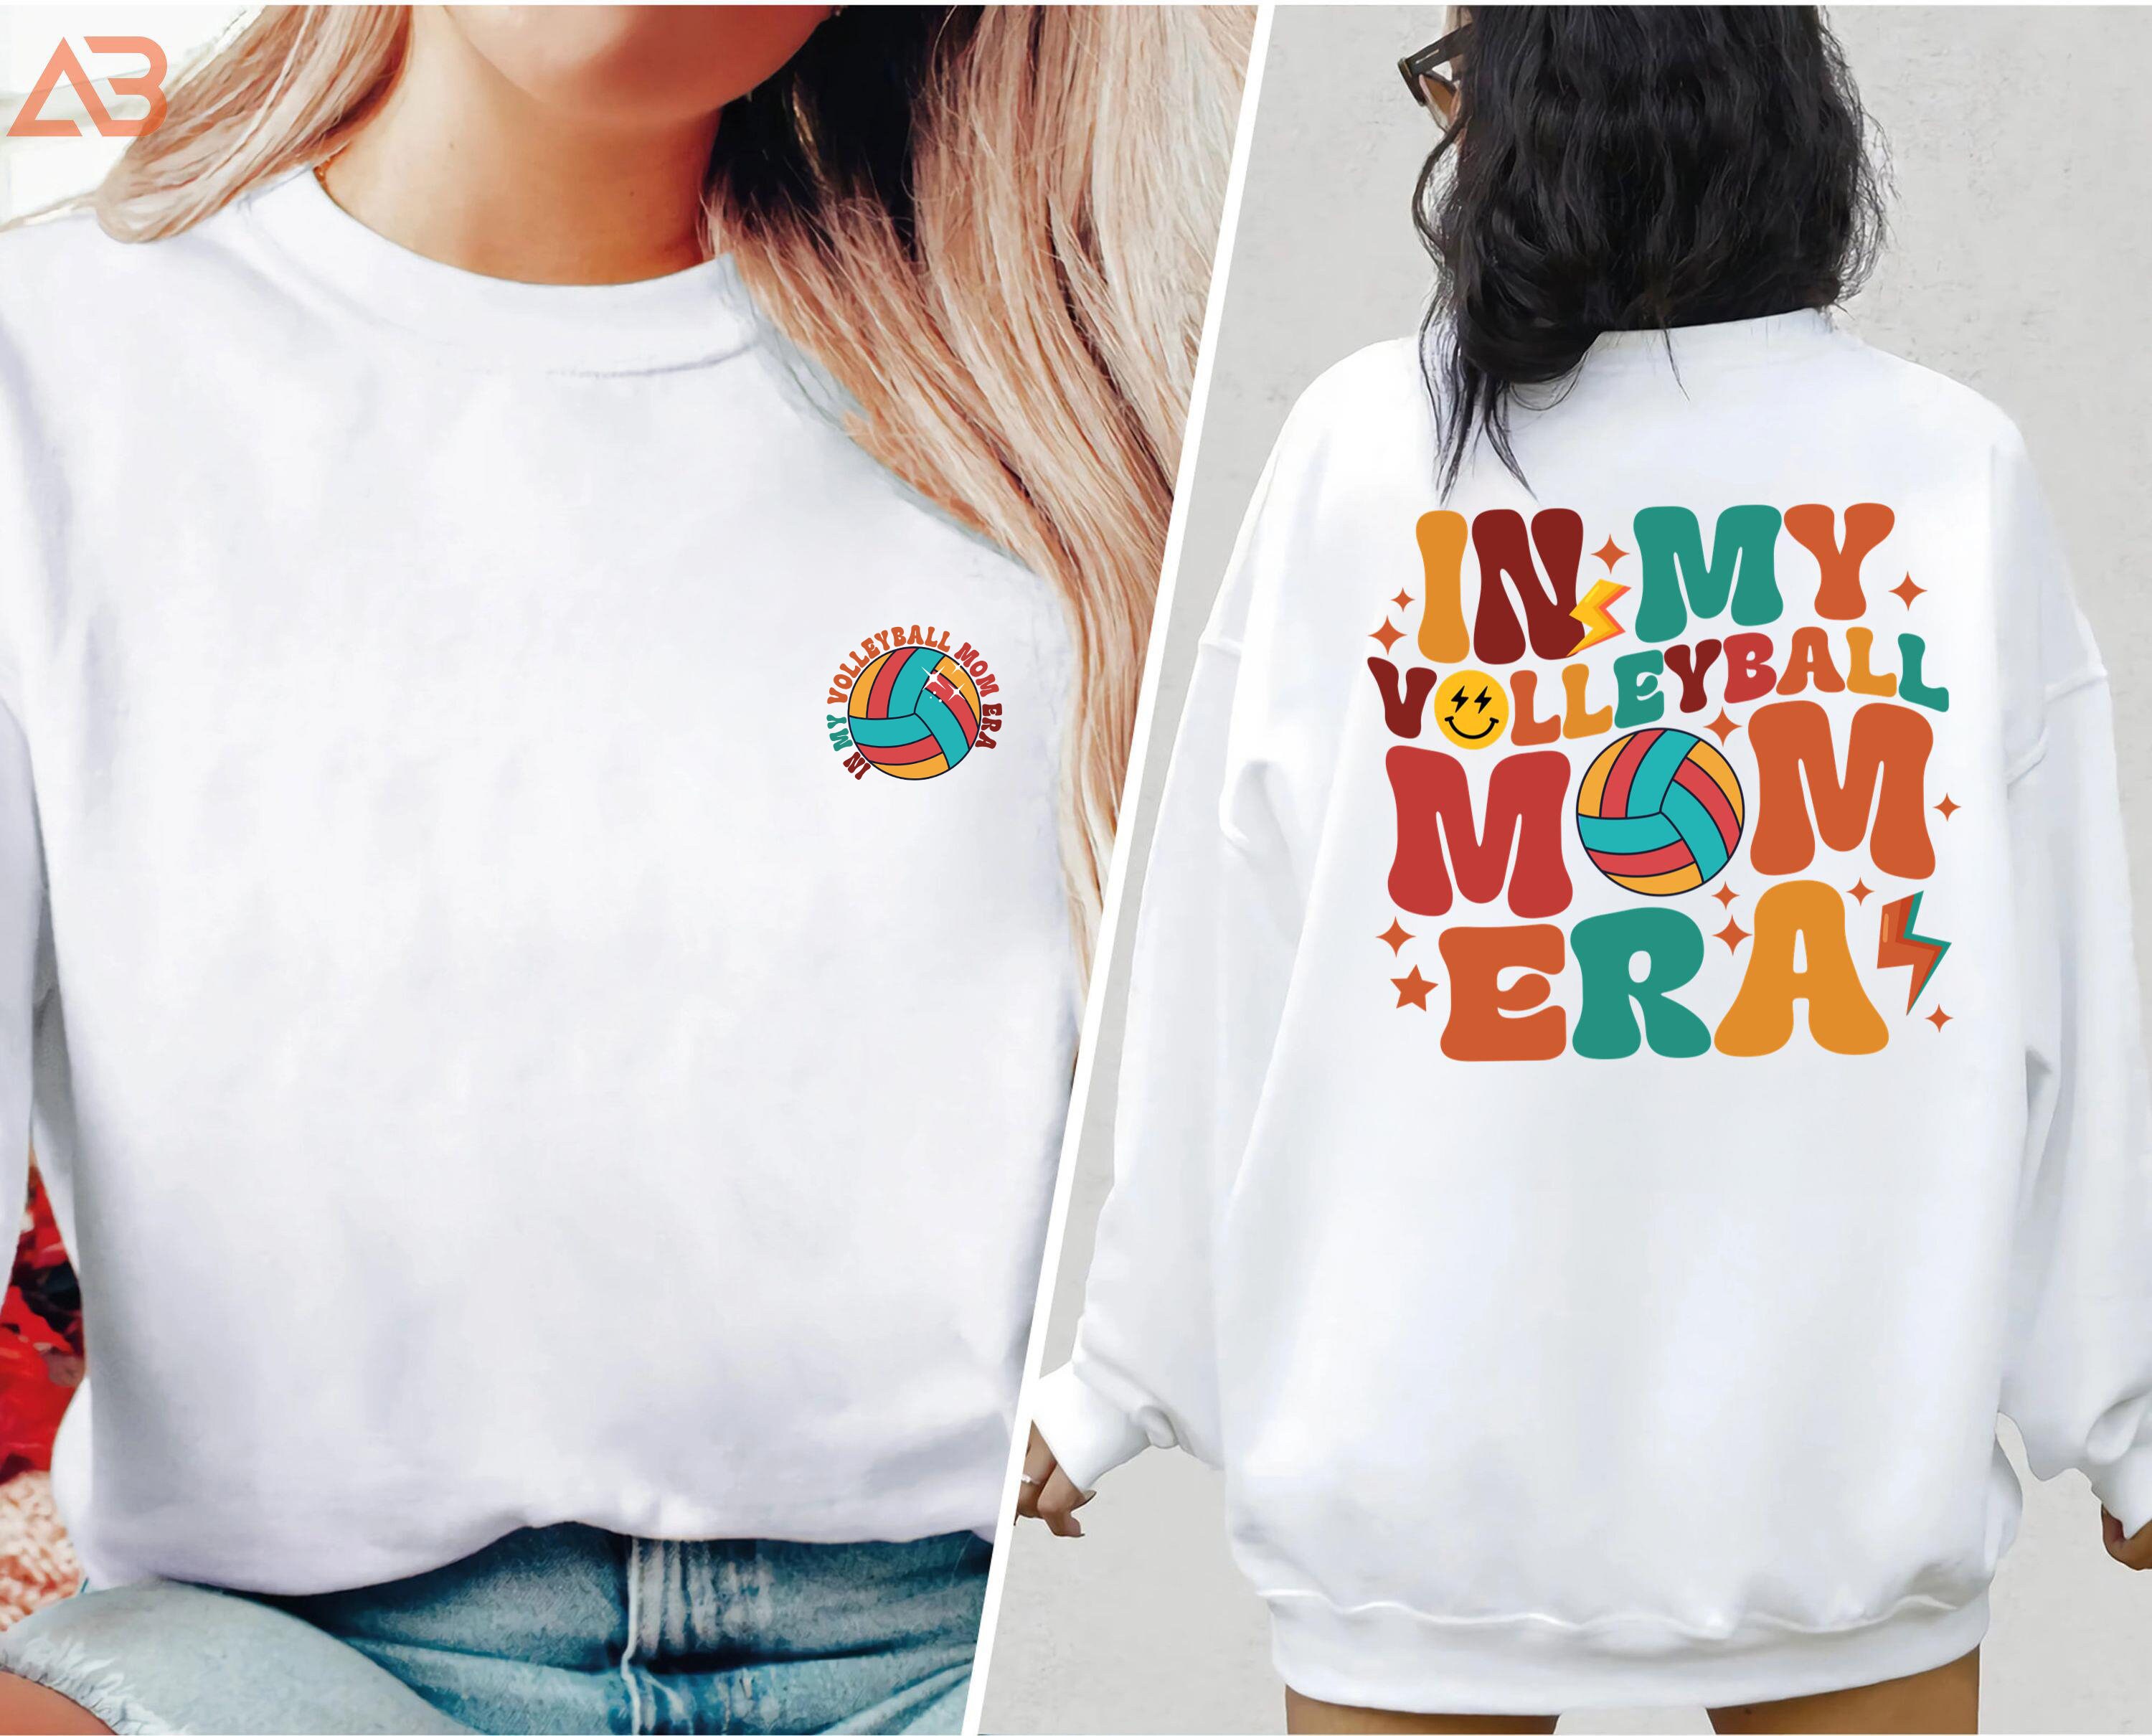 Cute Volleyball Double Sided Sweatshirts for Mom for Mothers Day Gift